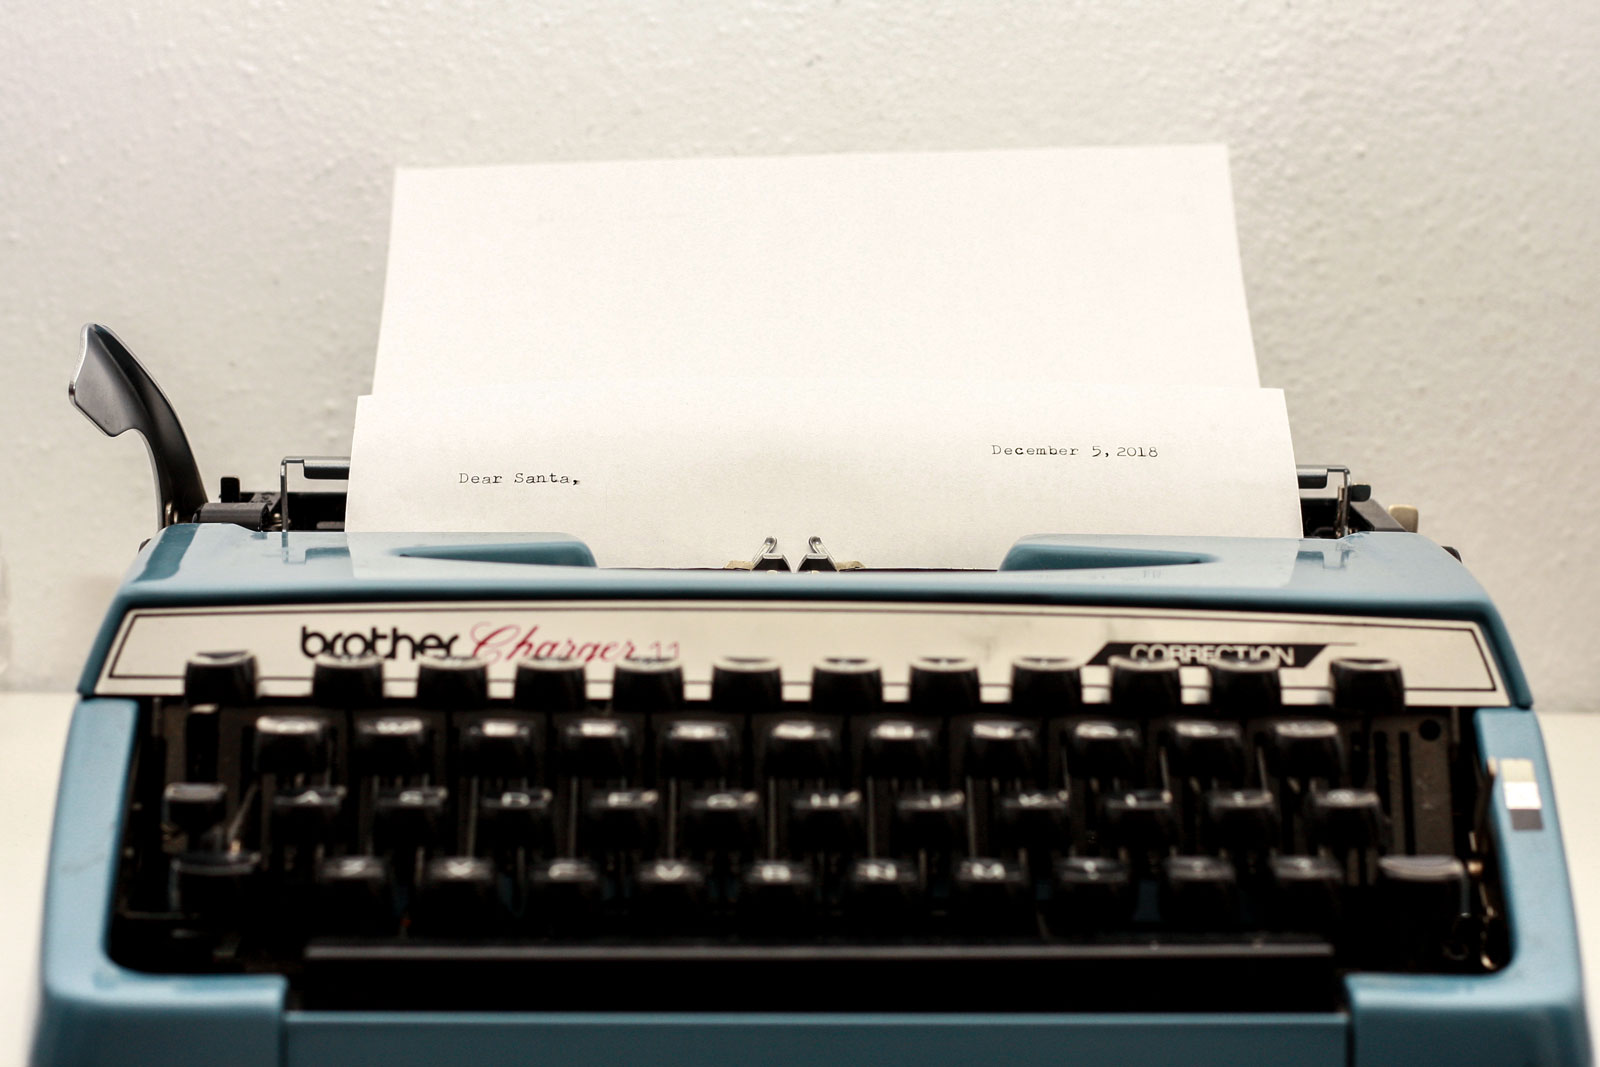 A typewriter with a letter for Santa